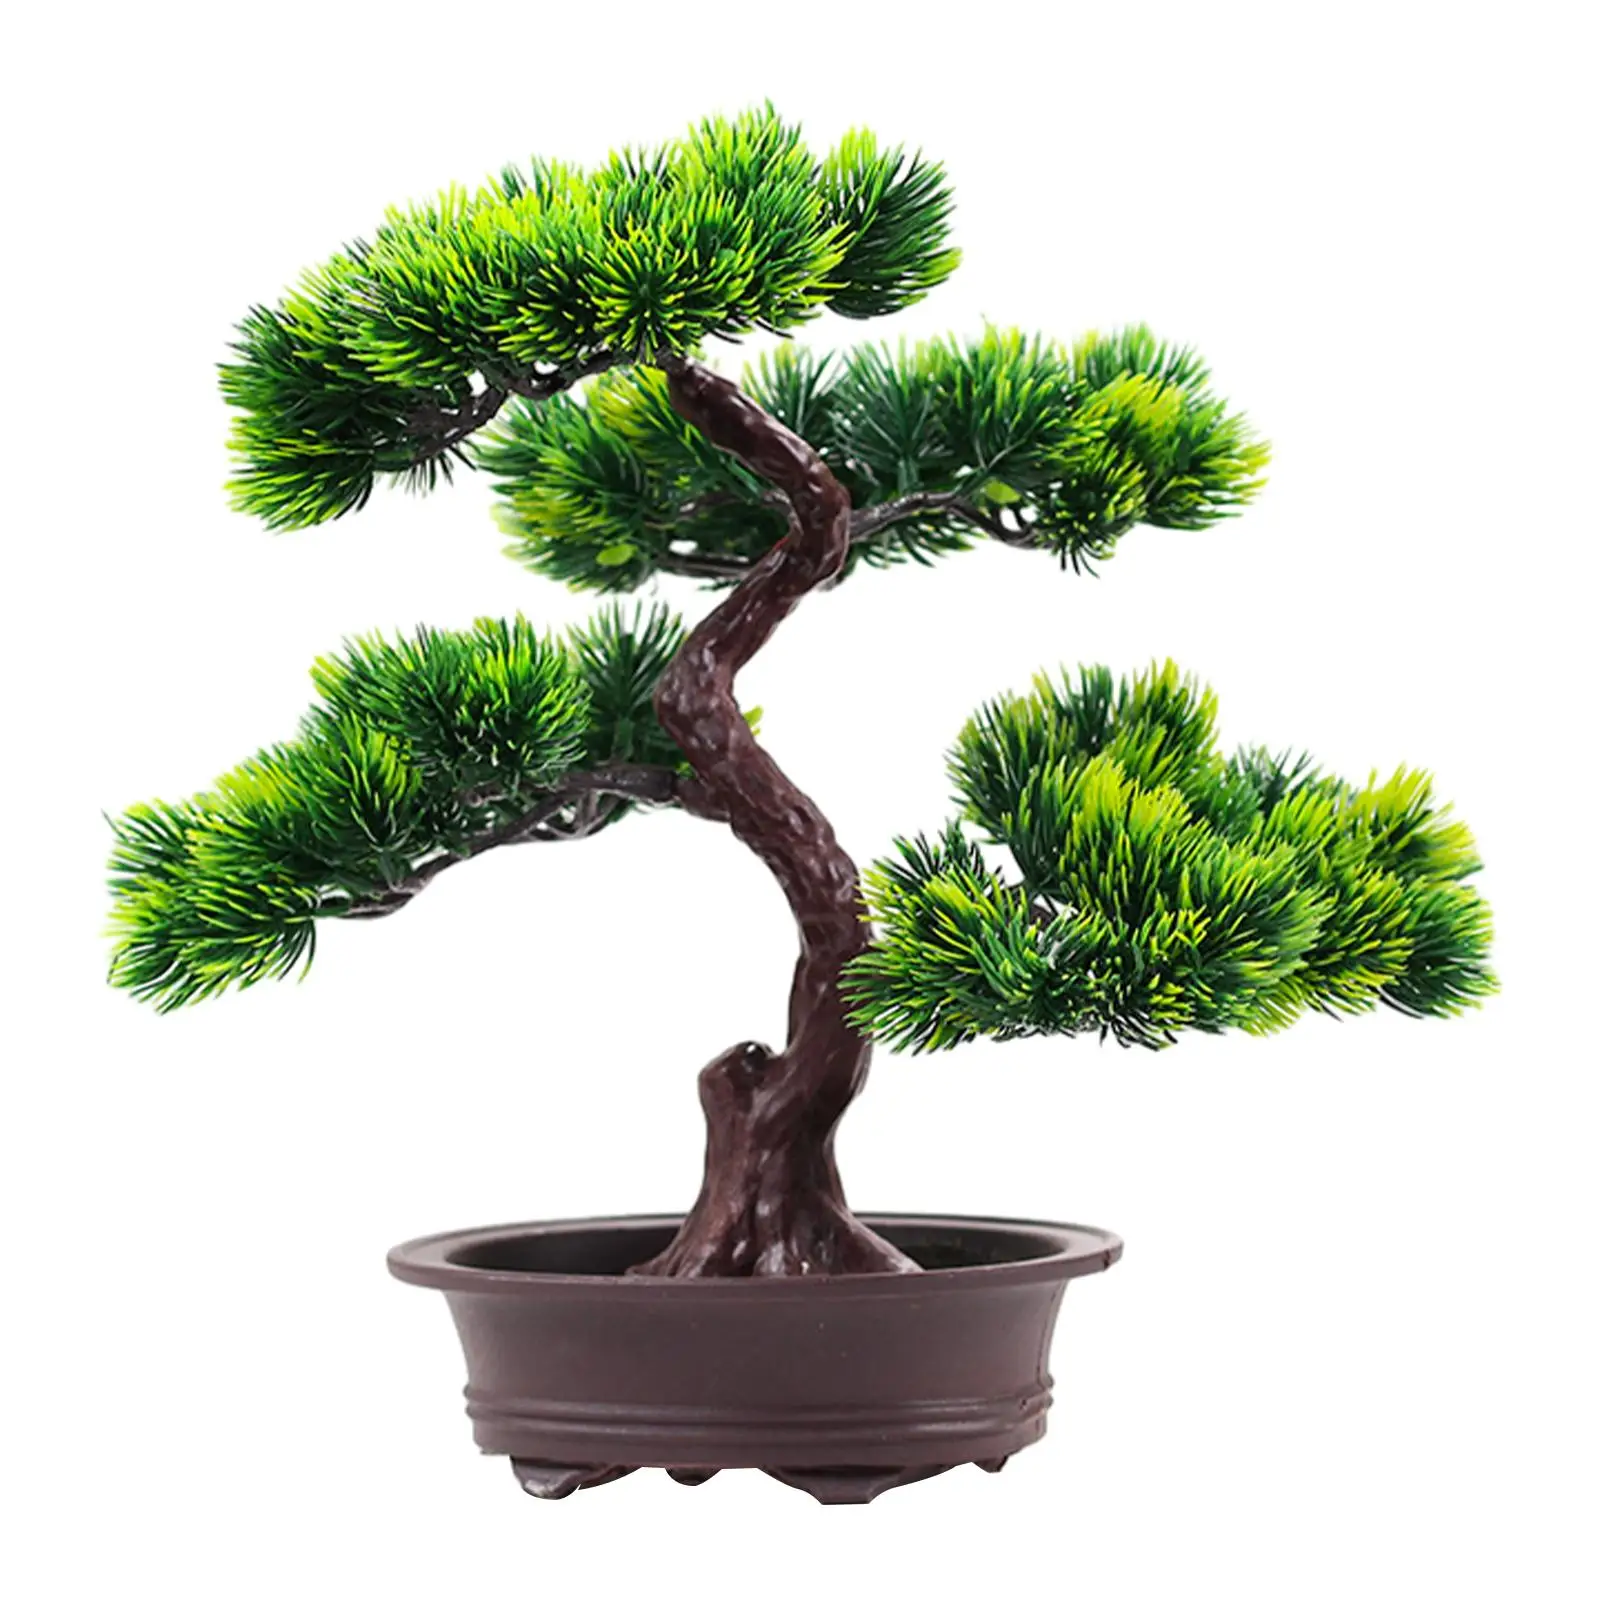 Artificial Bonsai Tree Green Tree Realistic Desktop Display Potted Faux Tree for Home Living Room Table